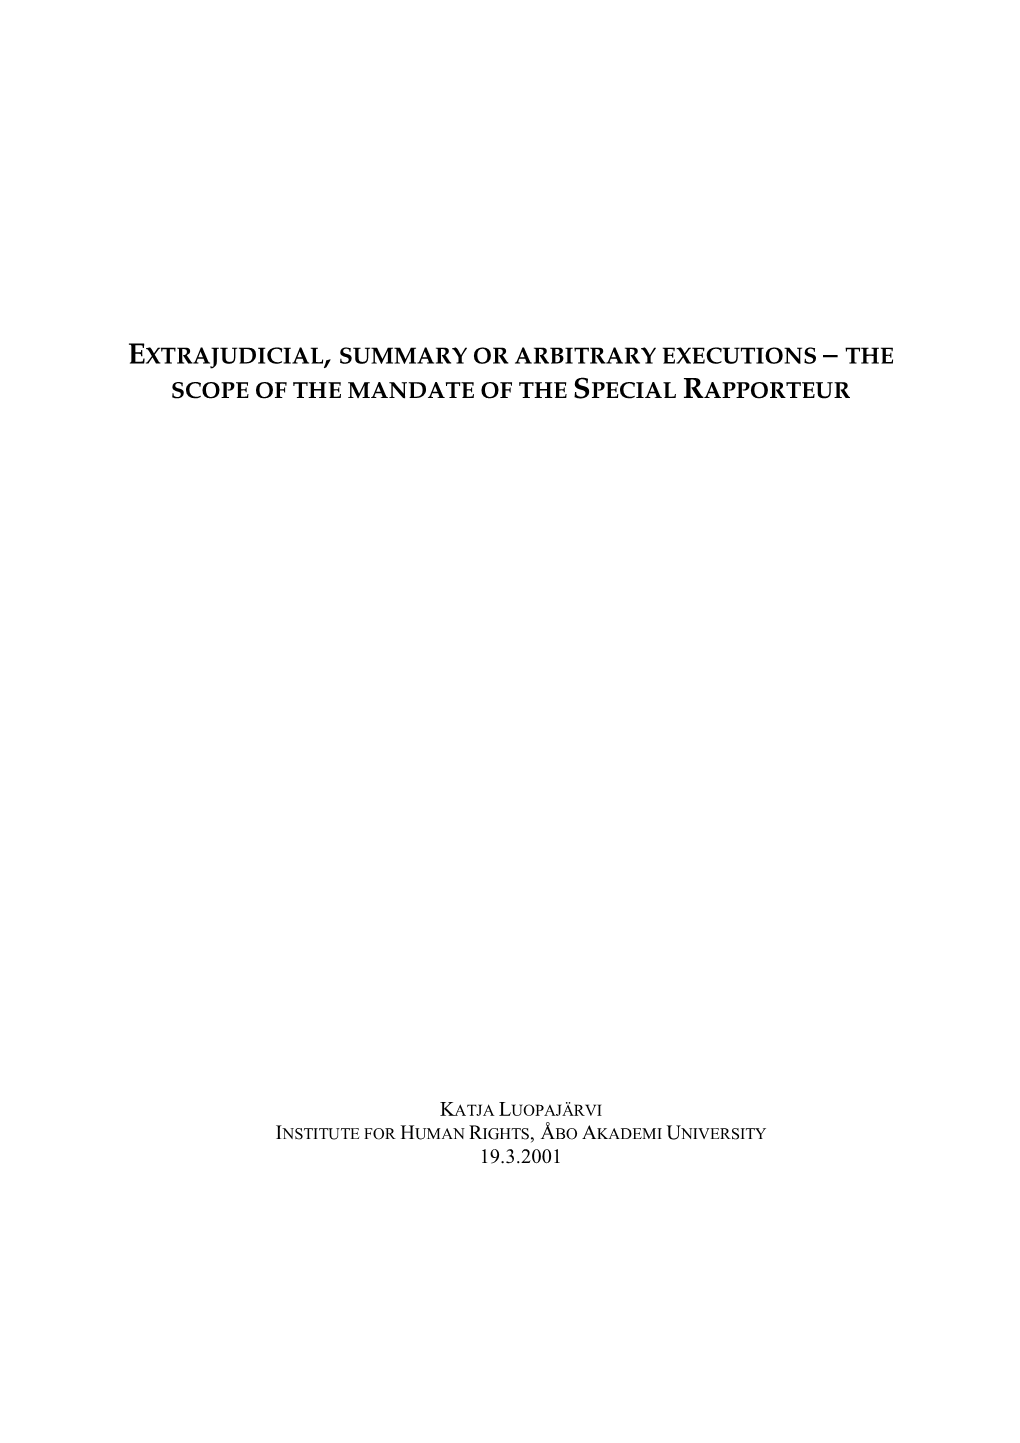 Extrajudicial, Summary Or Arbitrary Executions – the Scope of the Mandate of the Special Rapporteur